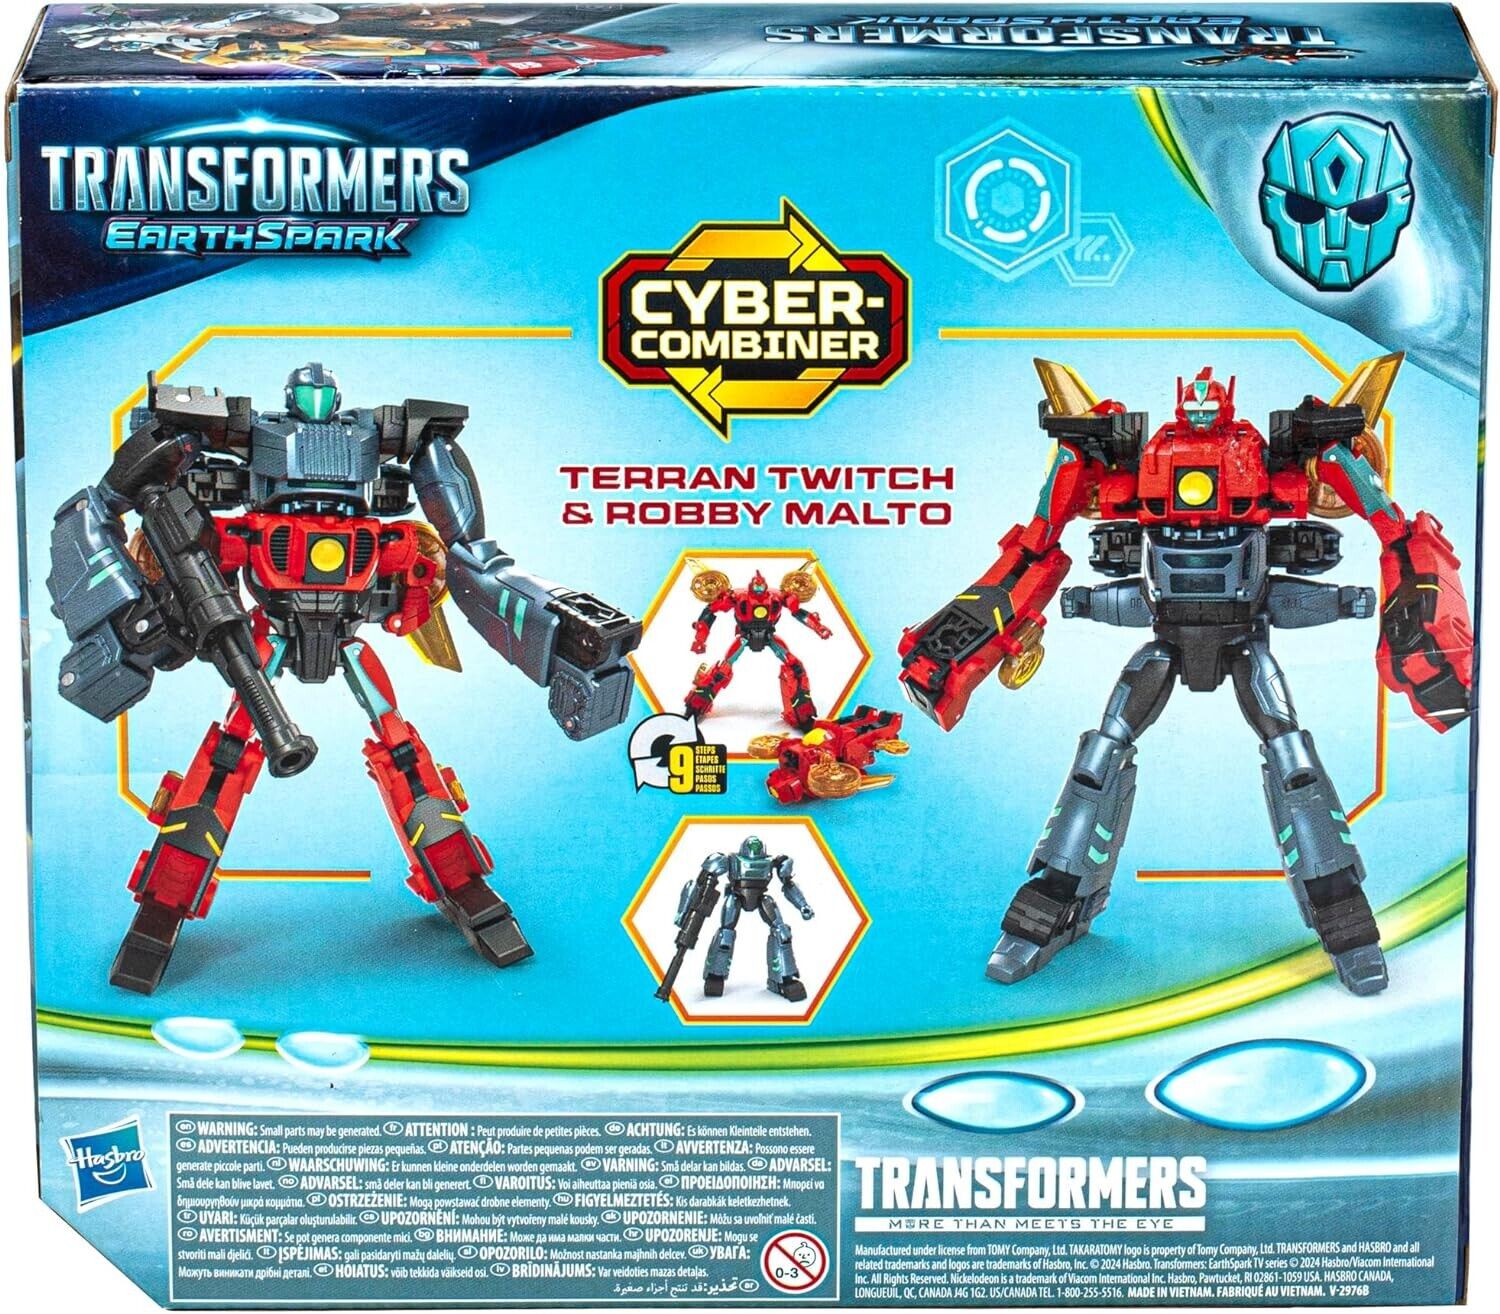 Transformers EarthSpark Cyber-Combiner Terran Twitch and Robby Malto Action Figu